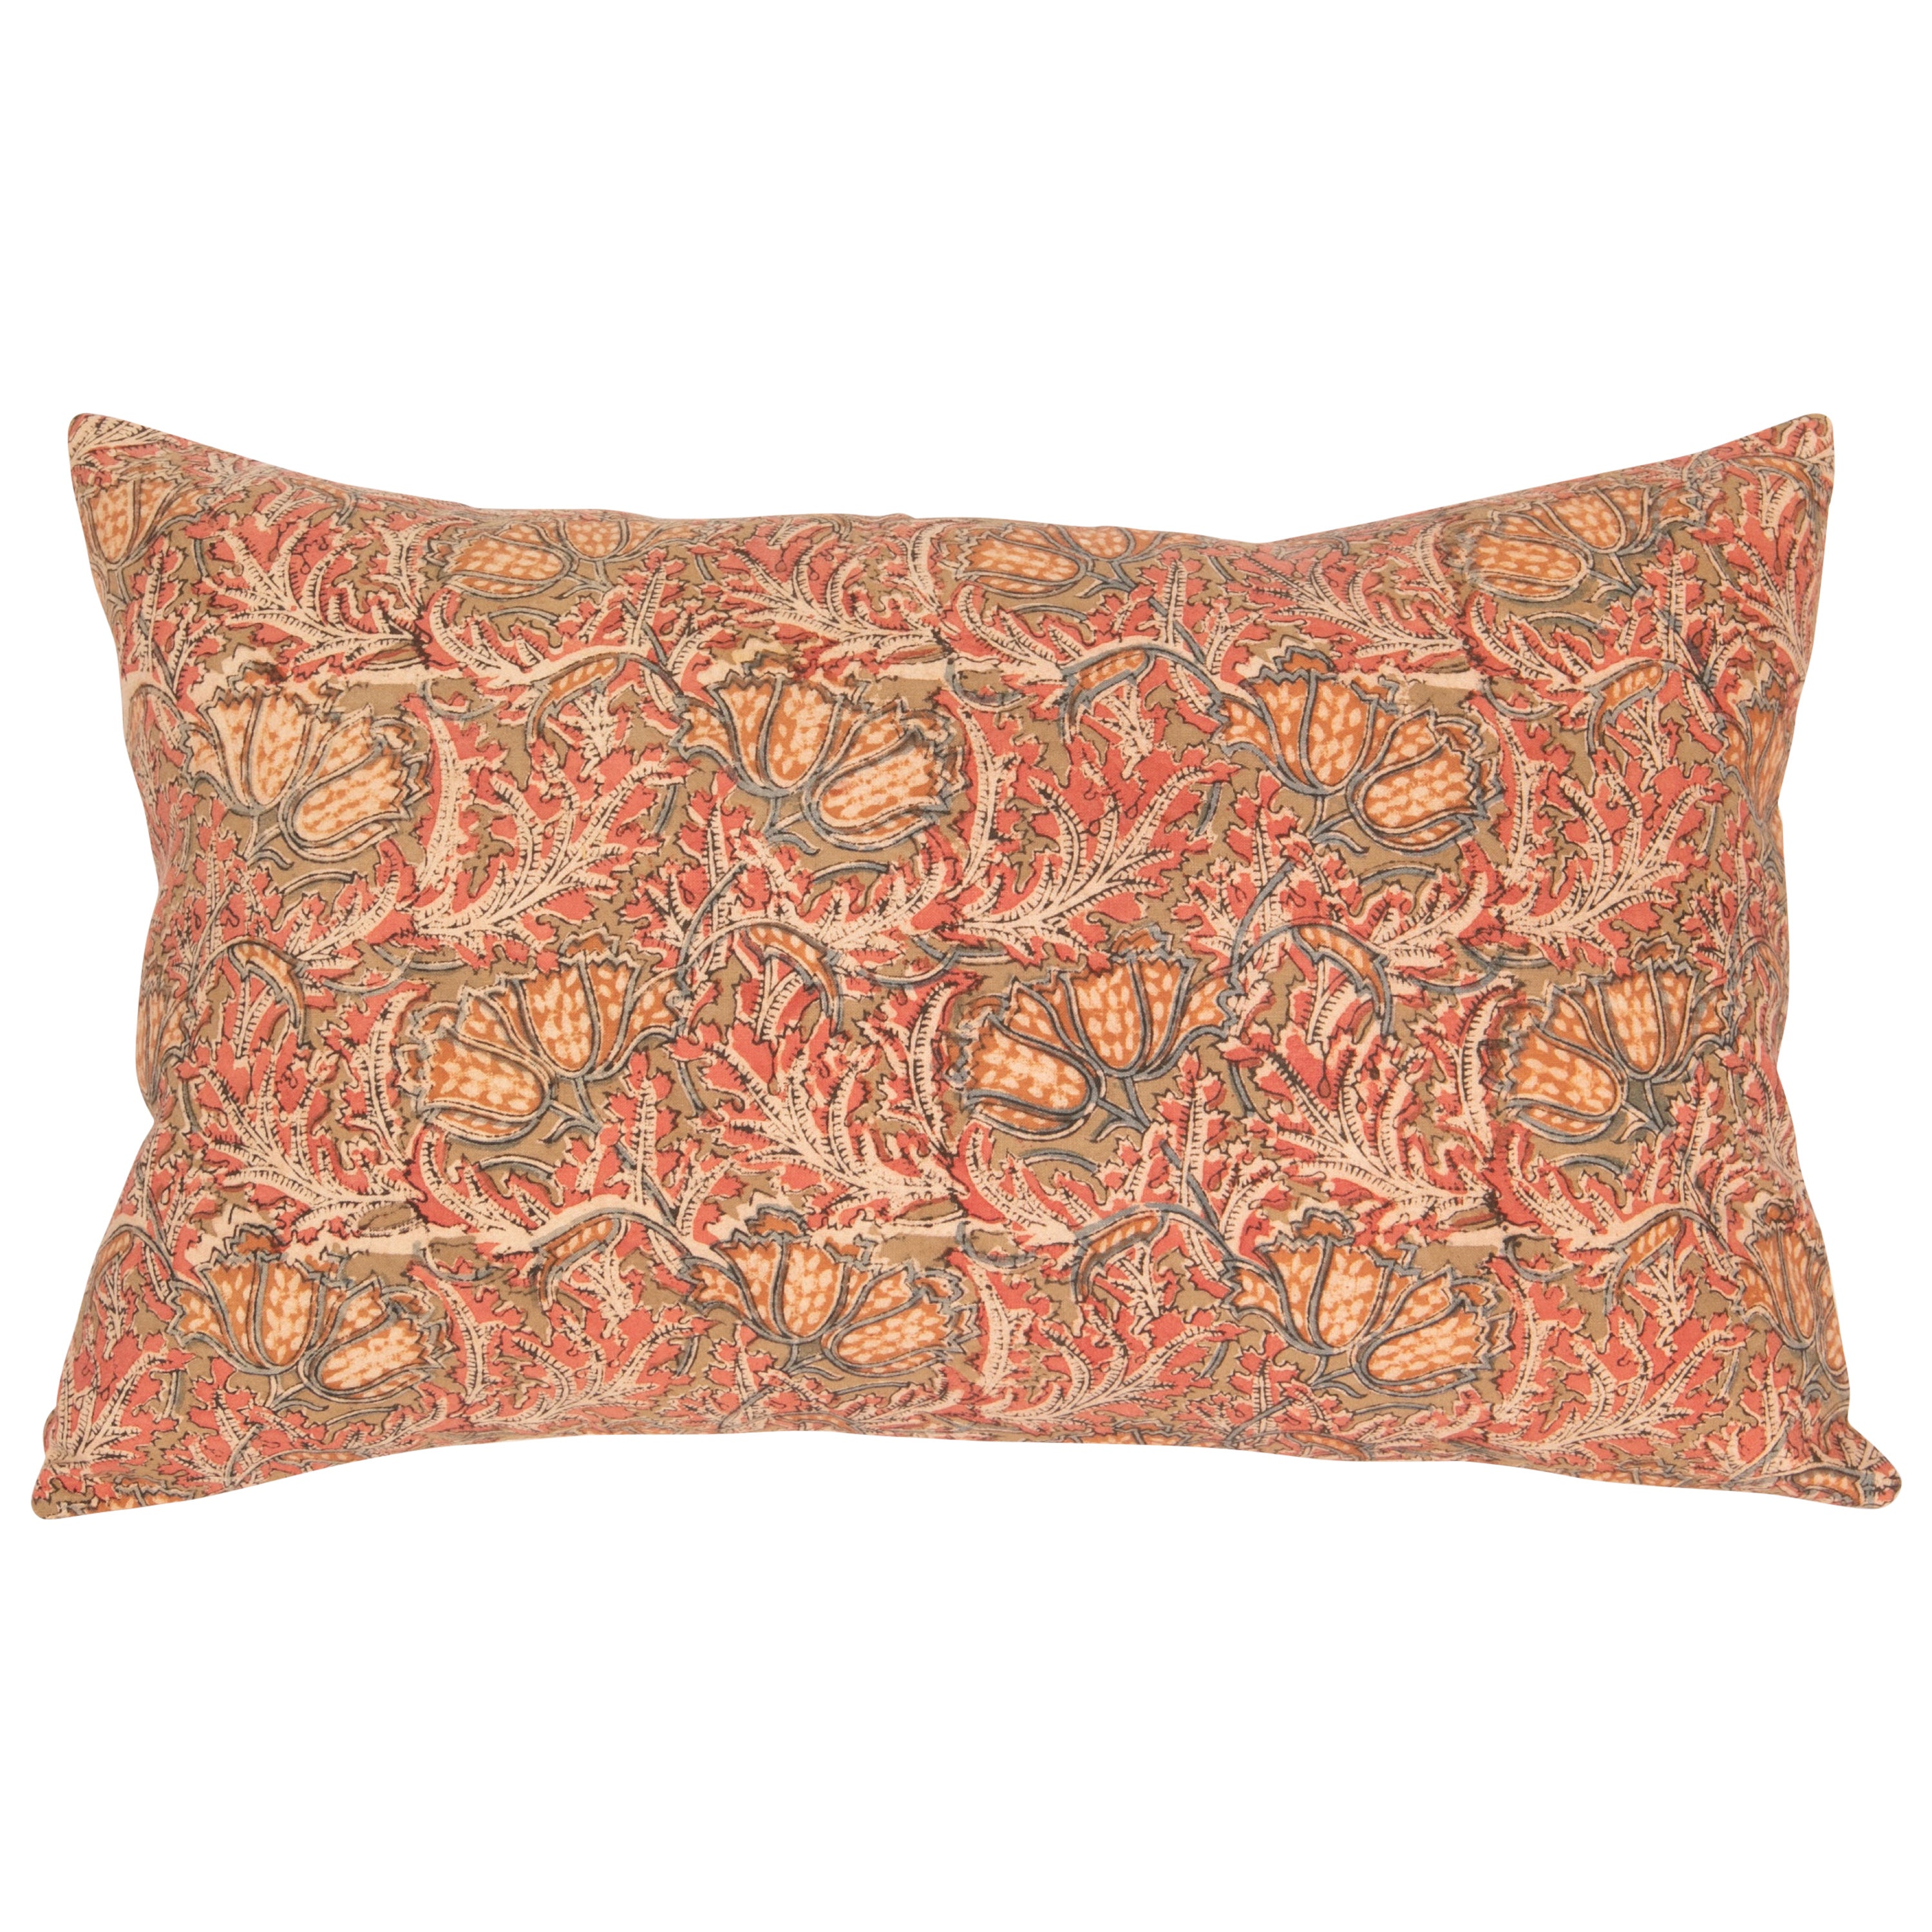 Pillow Case Made from an Indian Kalamkari, Early 20th C. For Sale